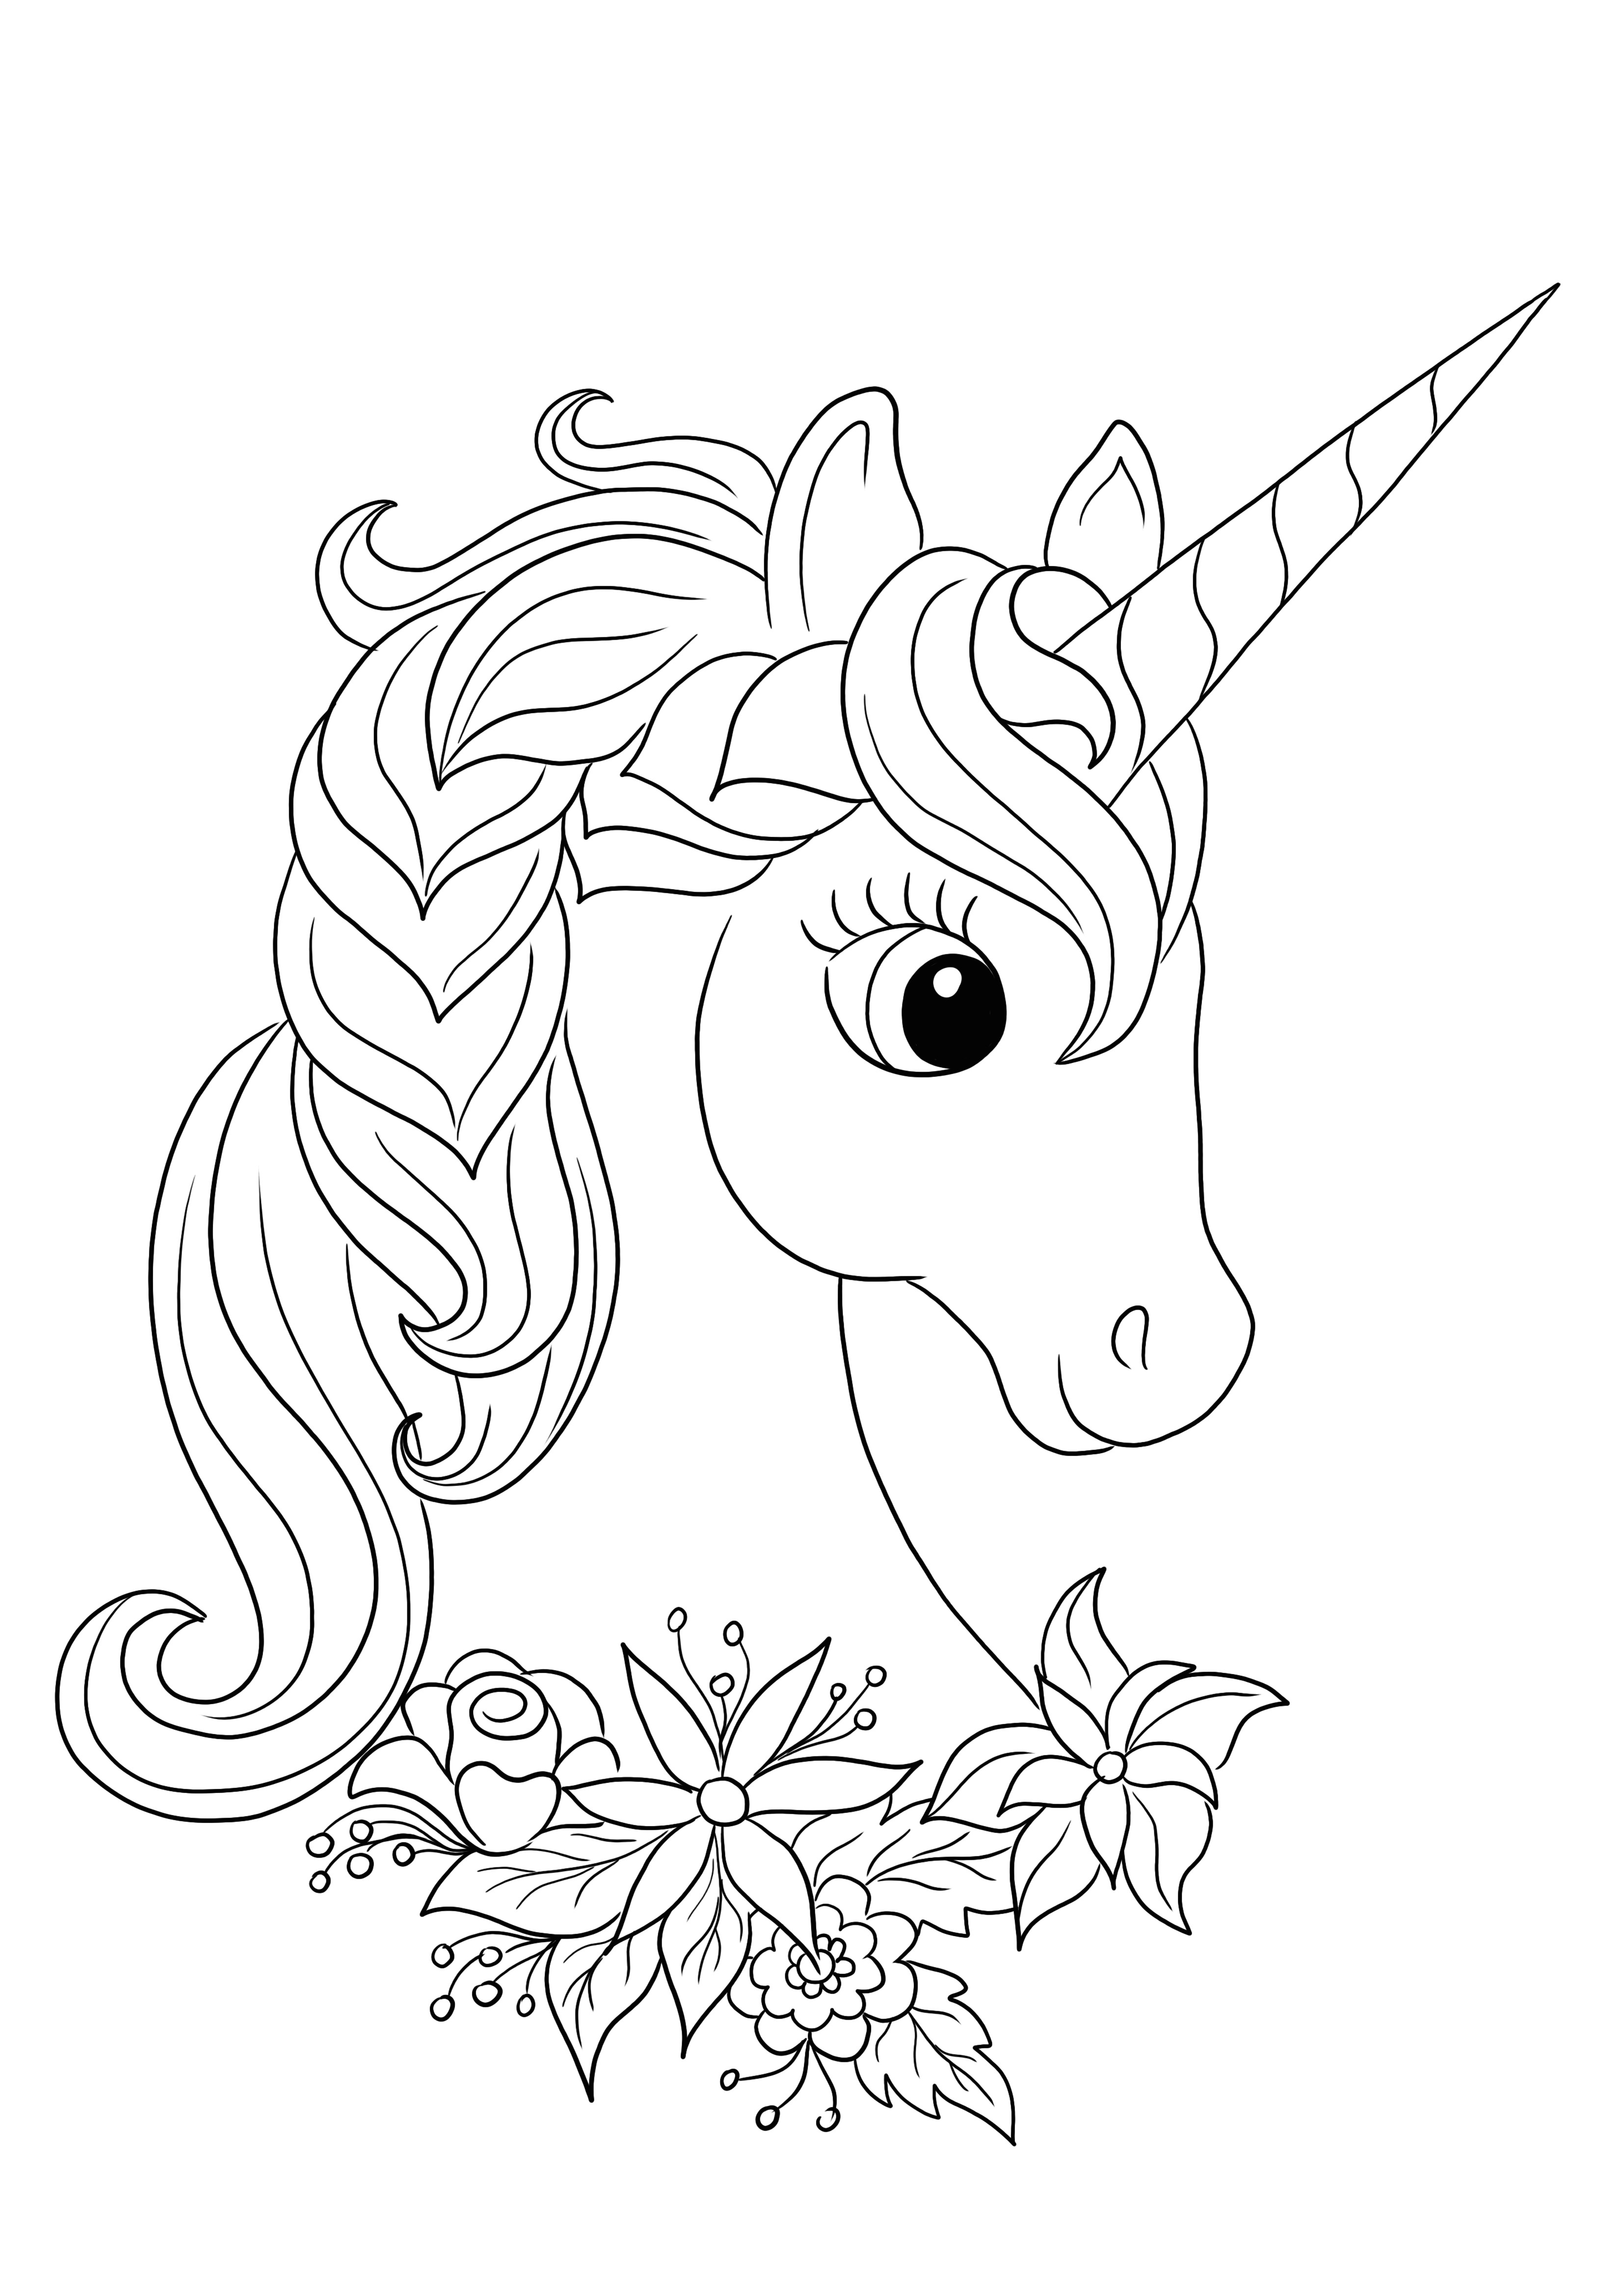 Simple coloring picture of a unicorn with flowers and big eyes to print